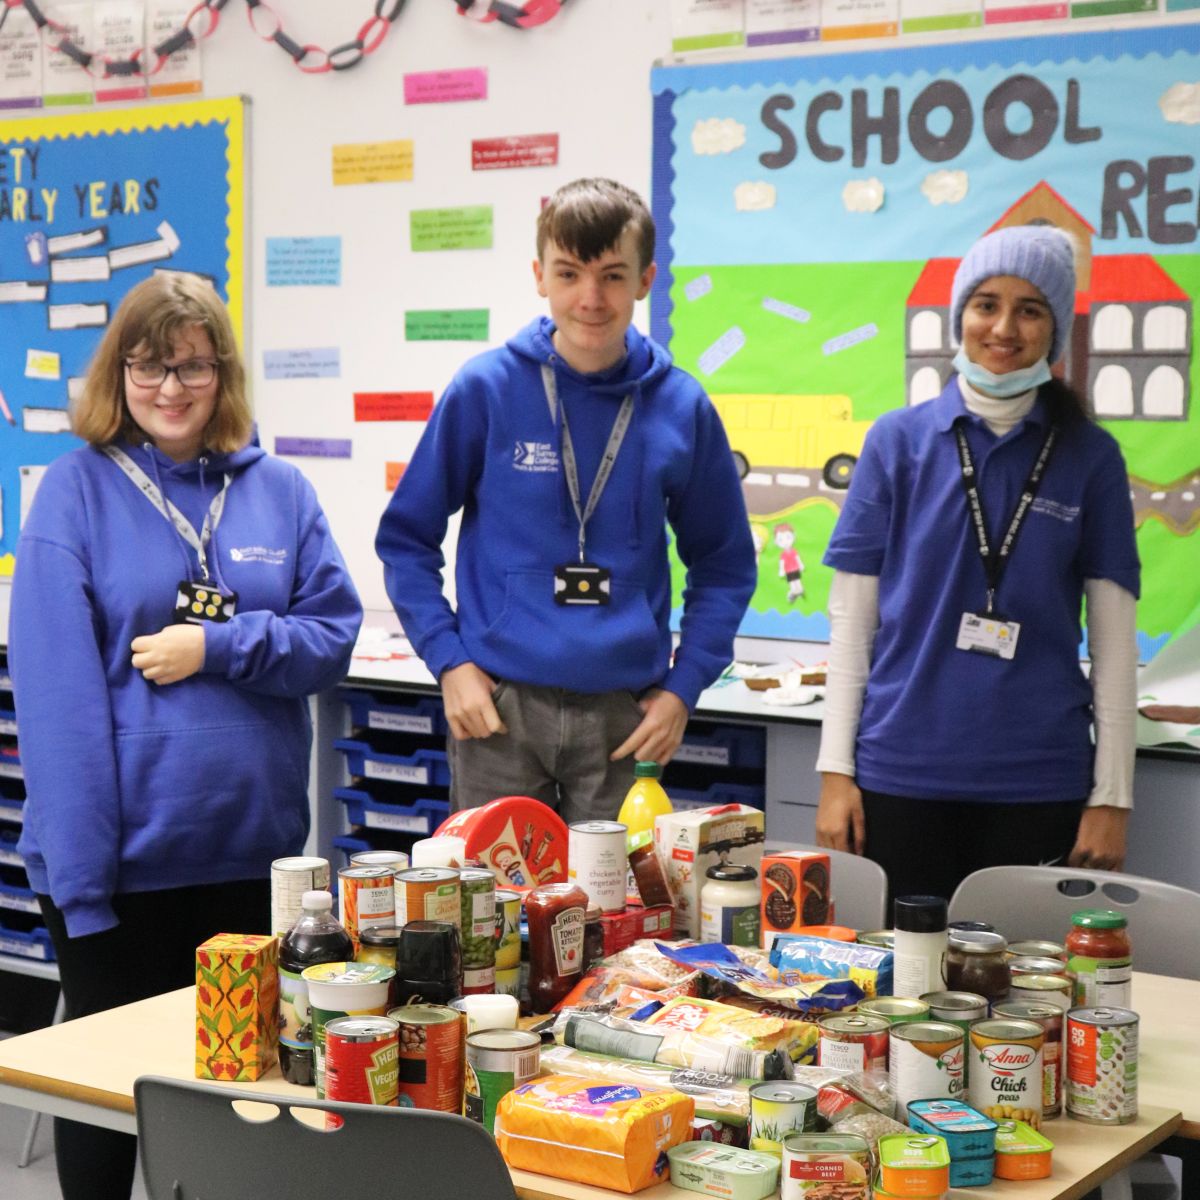 Health & Social Care students at East Surrey College - Food bank